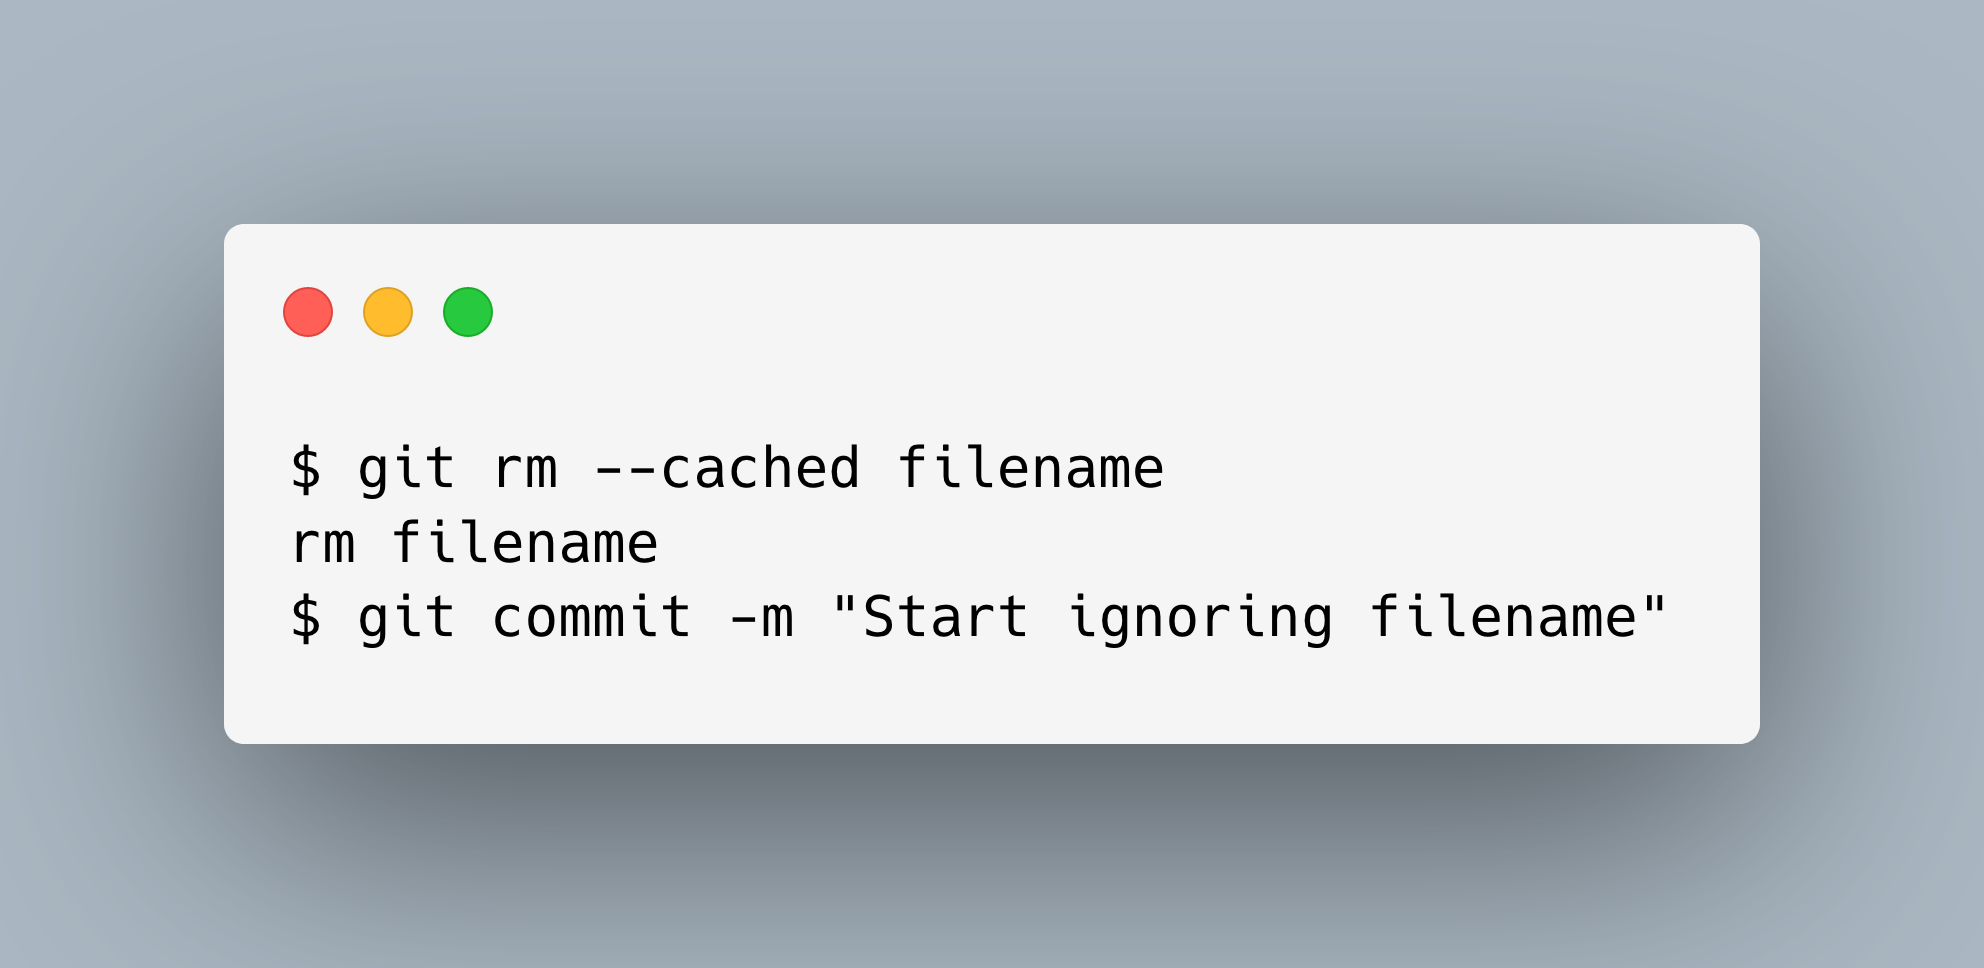 Removing files commands